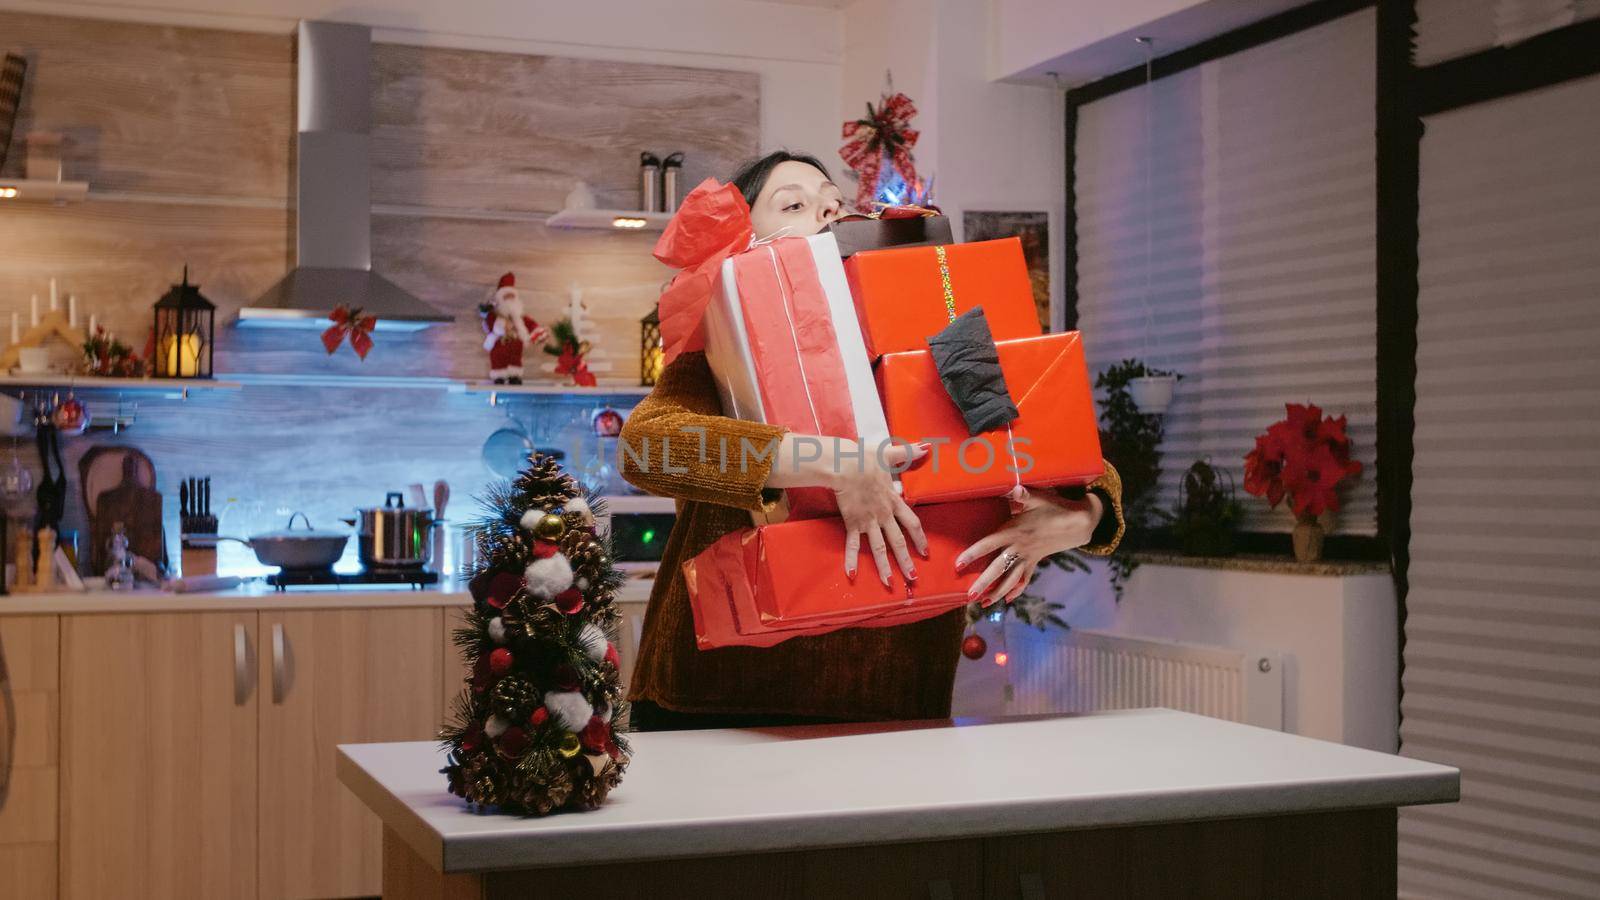 Woman carrying gift boxes for christmas festivity preparations. Festive adult holding presents with wrapping paper, ribbon, and bow tie for family at seasonal holiday celebration.